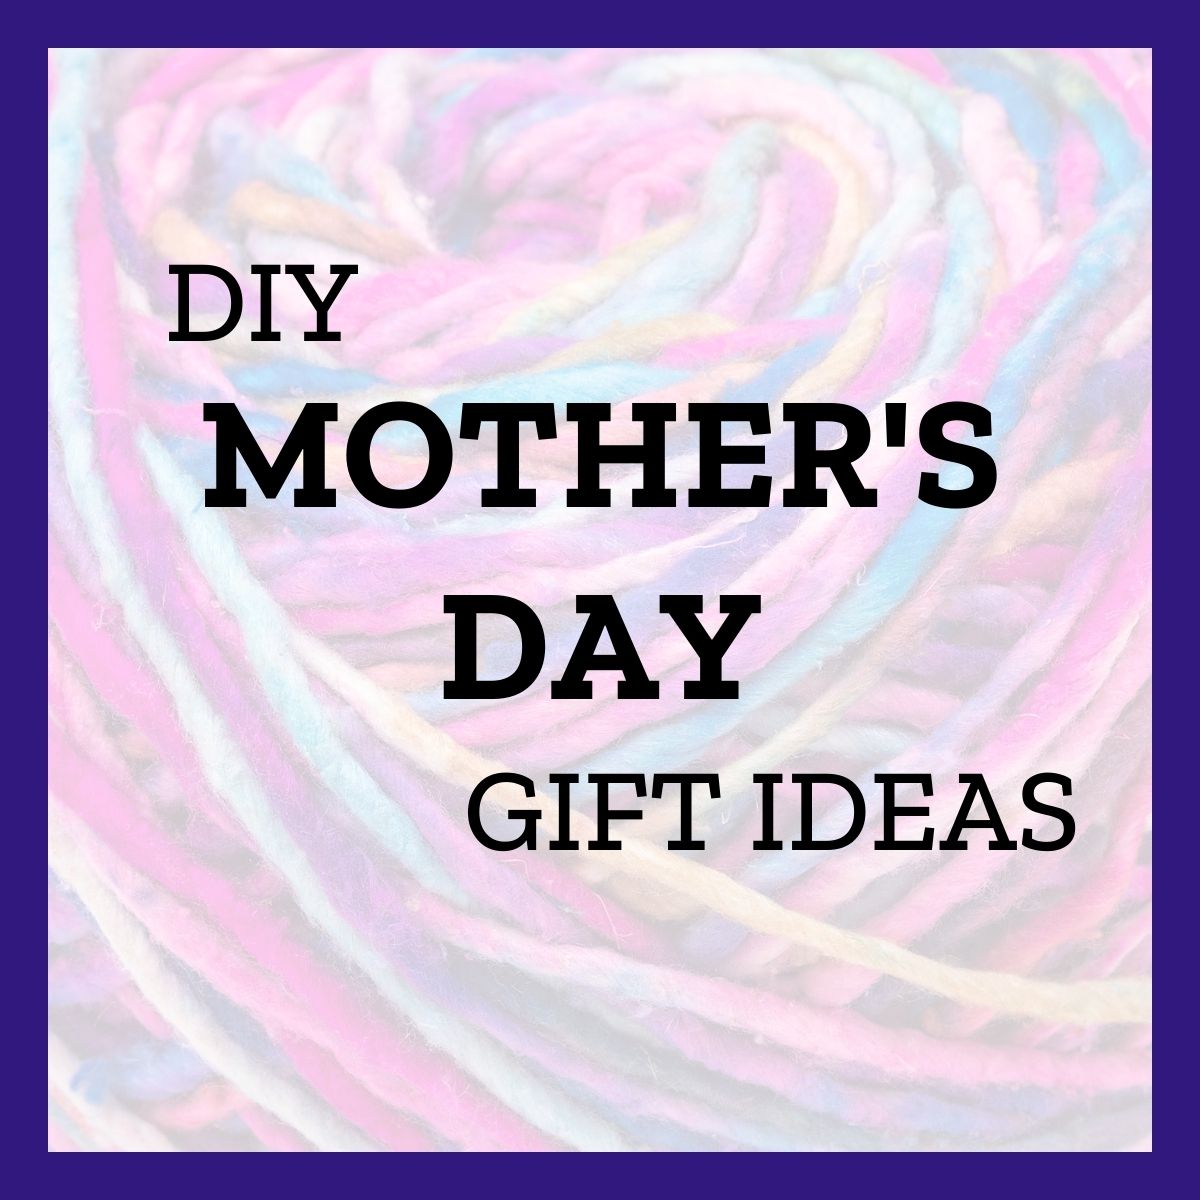 DIY Gifts to Make for Mom This Mothers Day - Darn Good Yarn